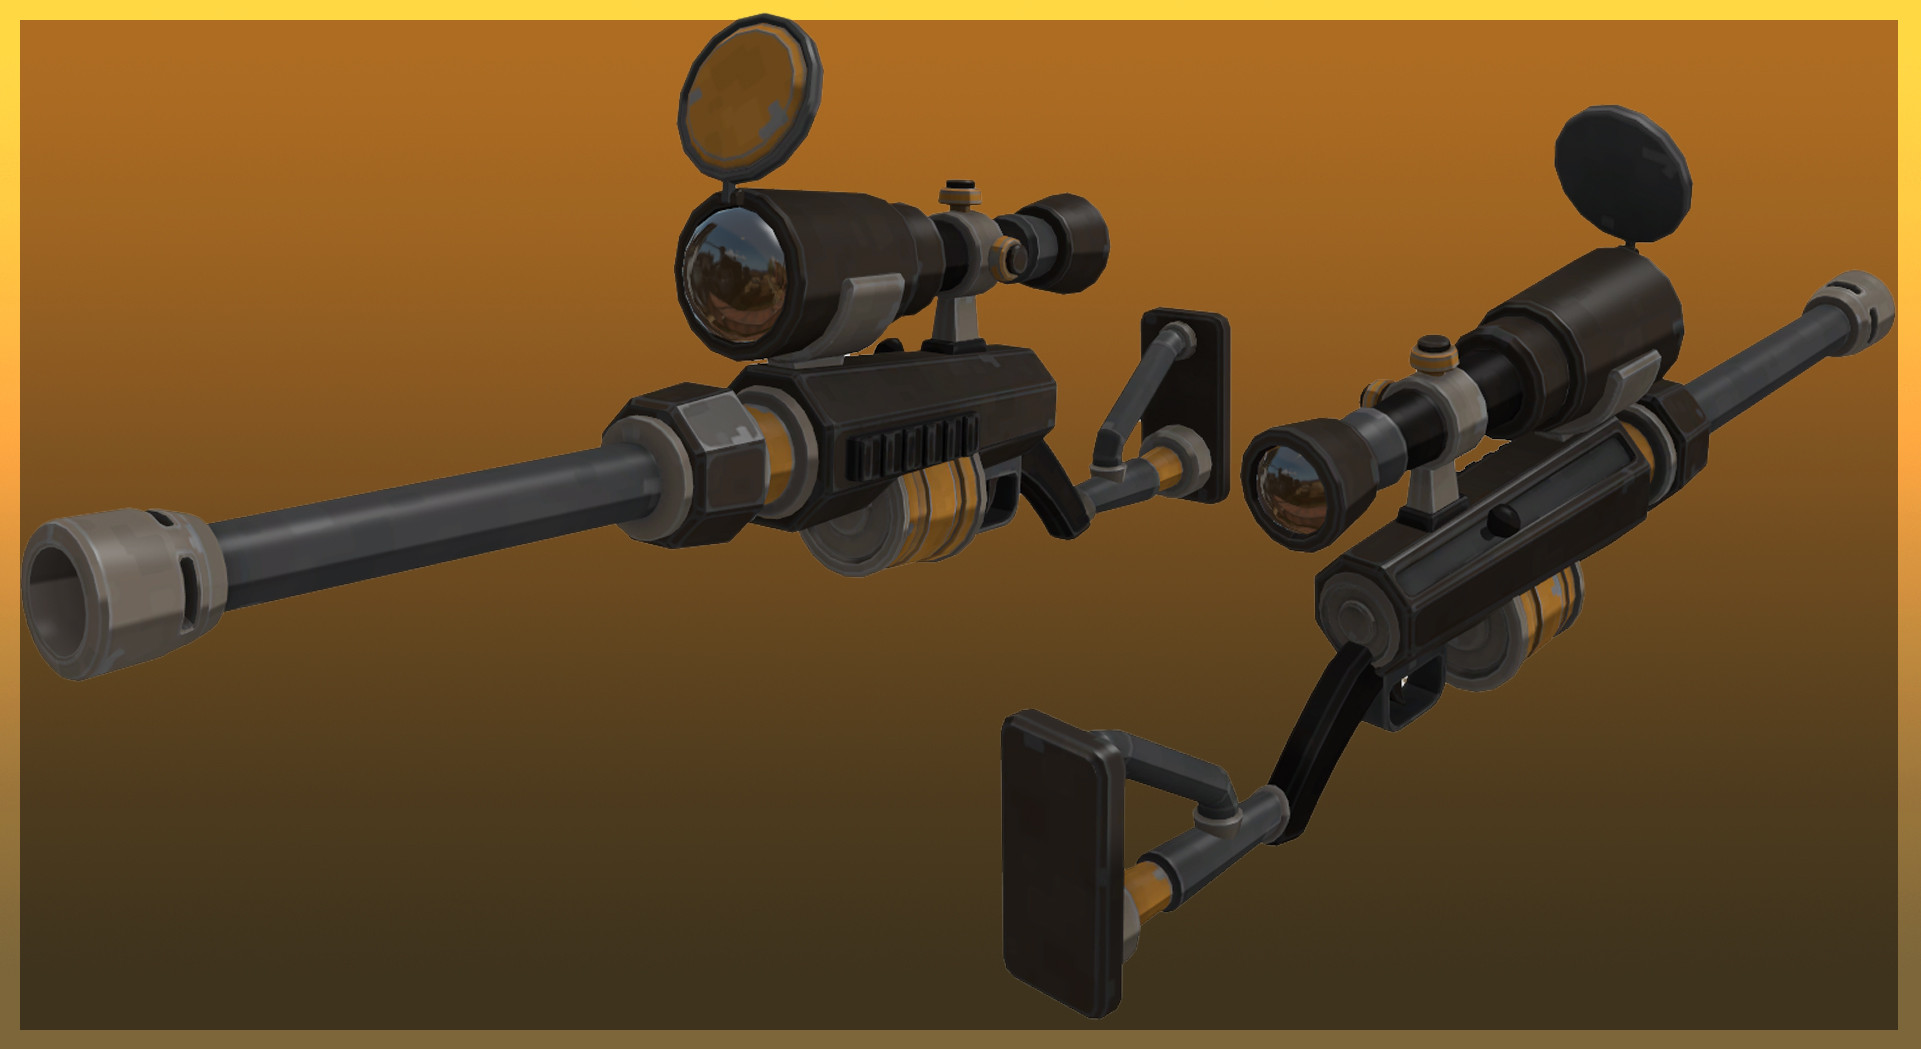 Sniper Rifle for the Sniper Class